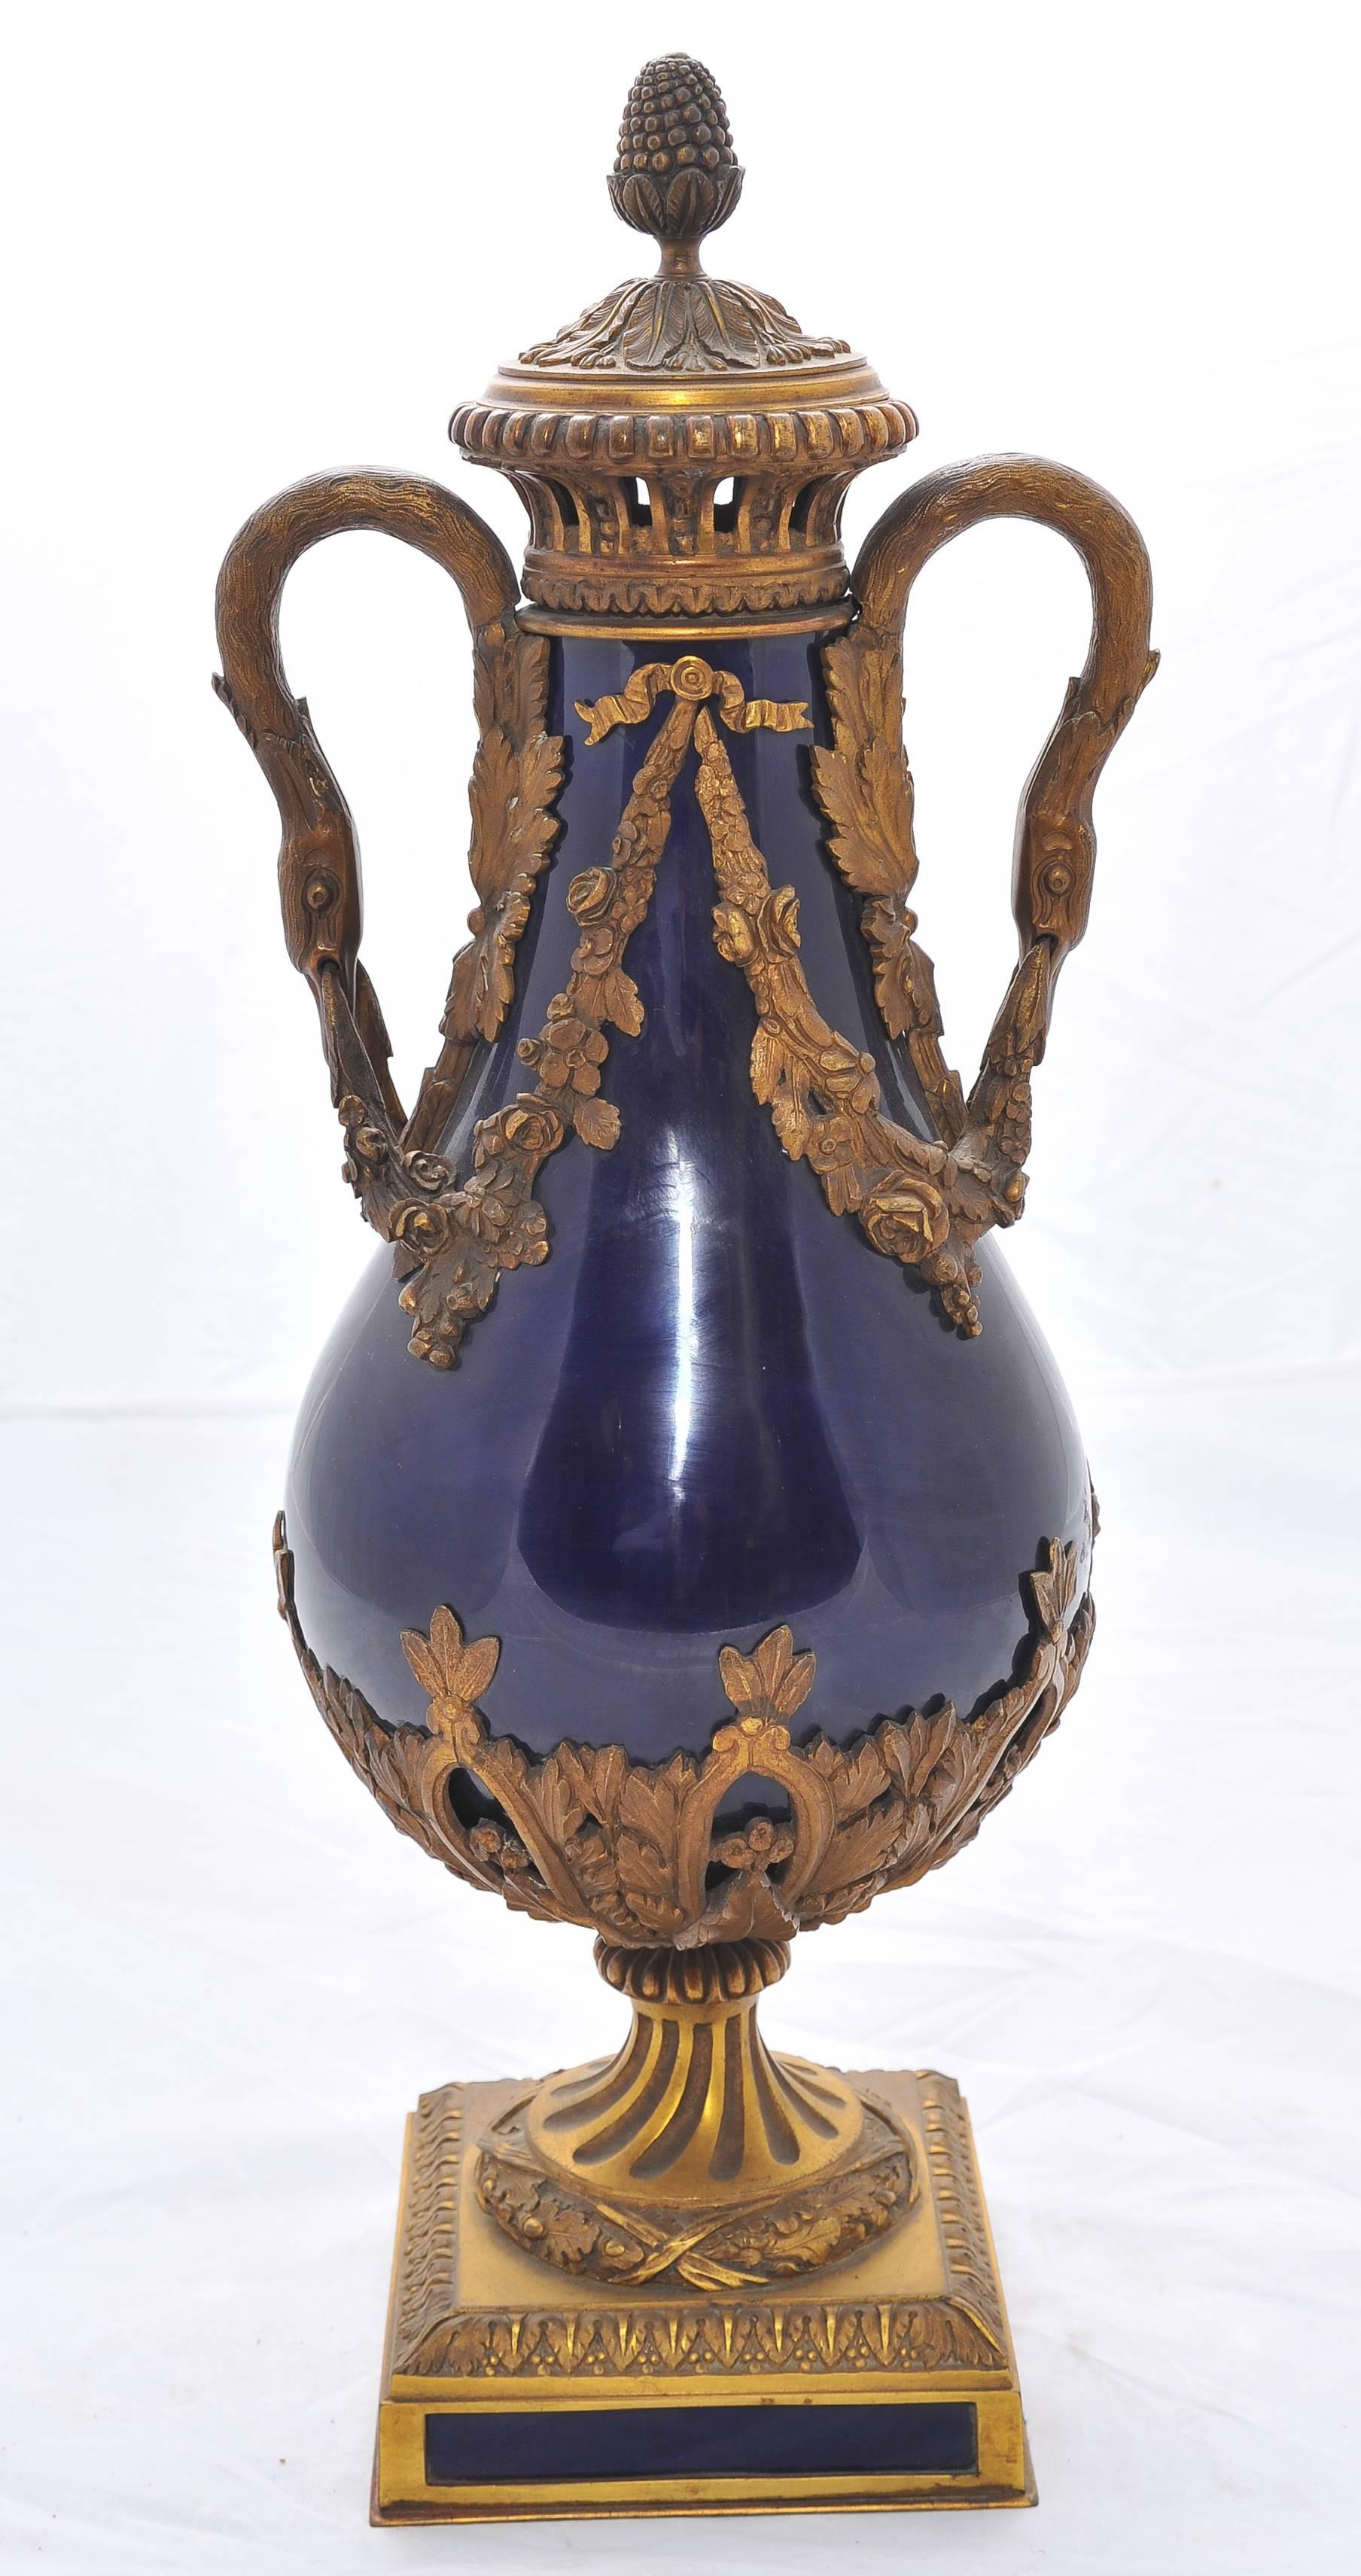 A good quality pair of 19th century Sèvres Royal blue porcelain vases, each with classical gilded ormolu lids, handles and bases.